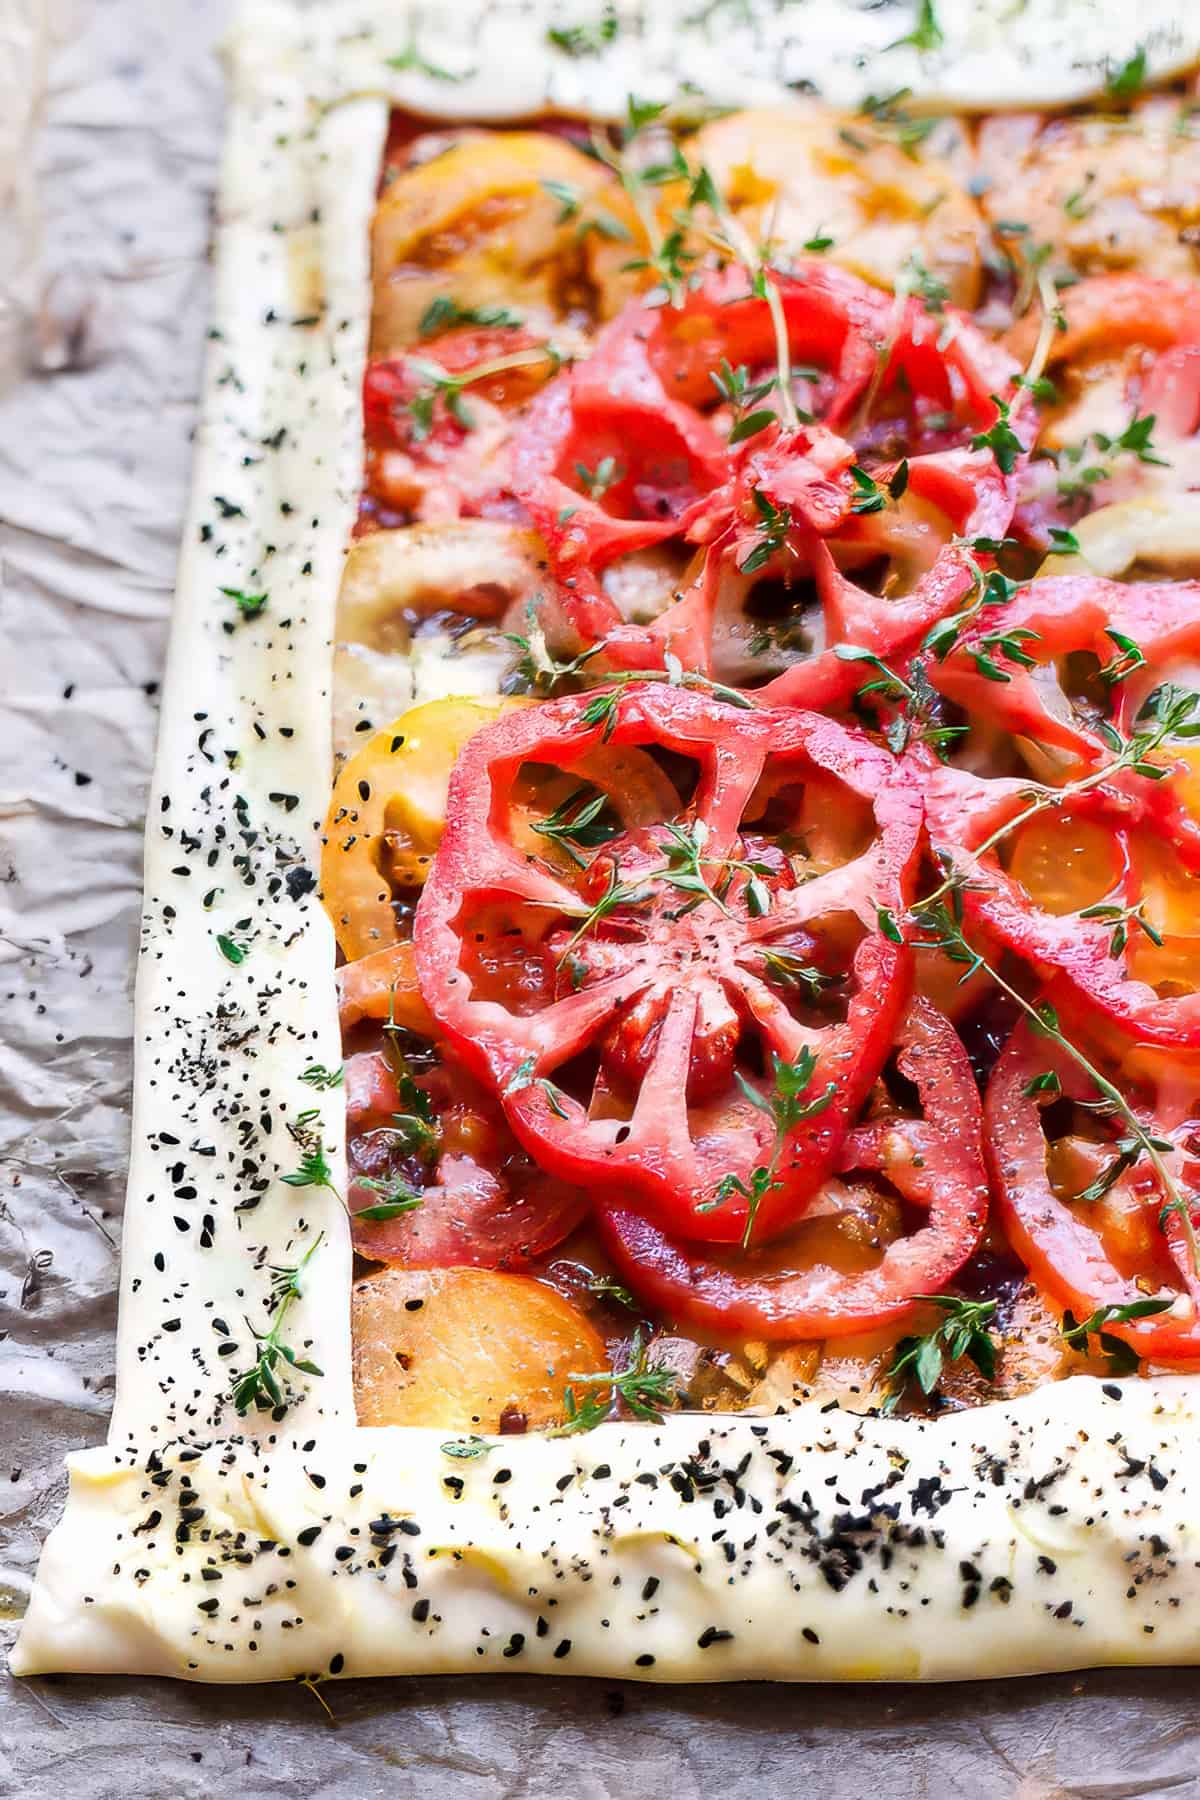 Unbaked tomato tart with thyme and basil on a baking tray.